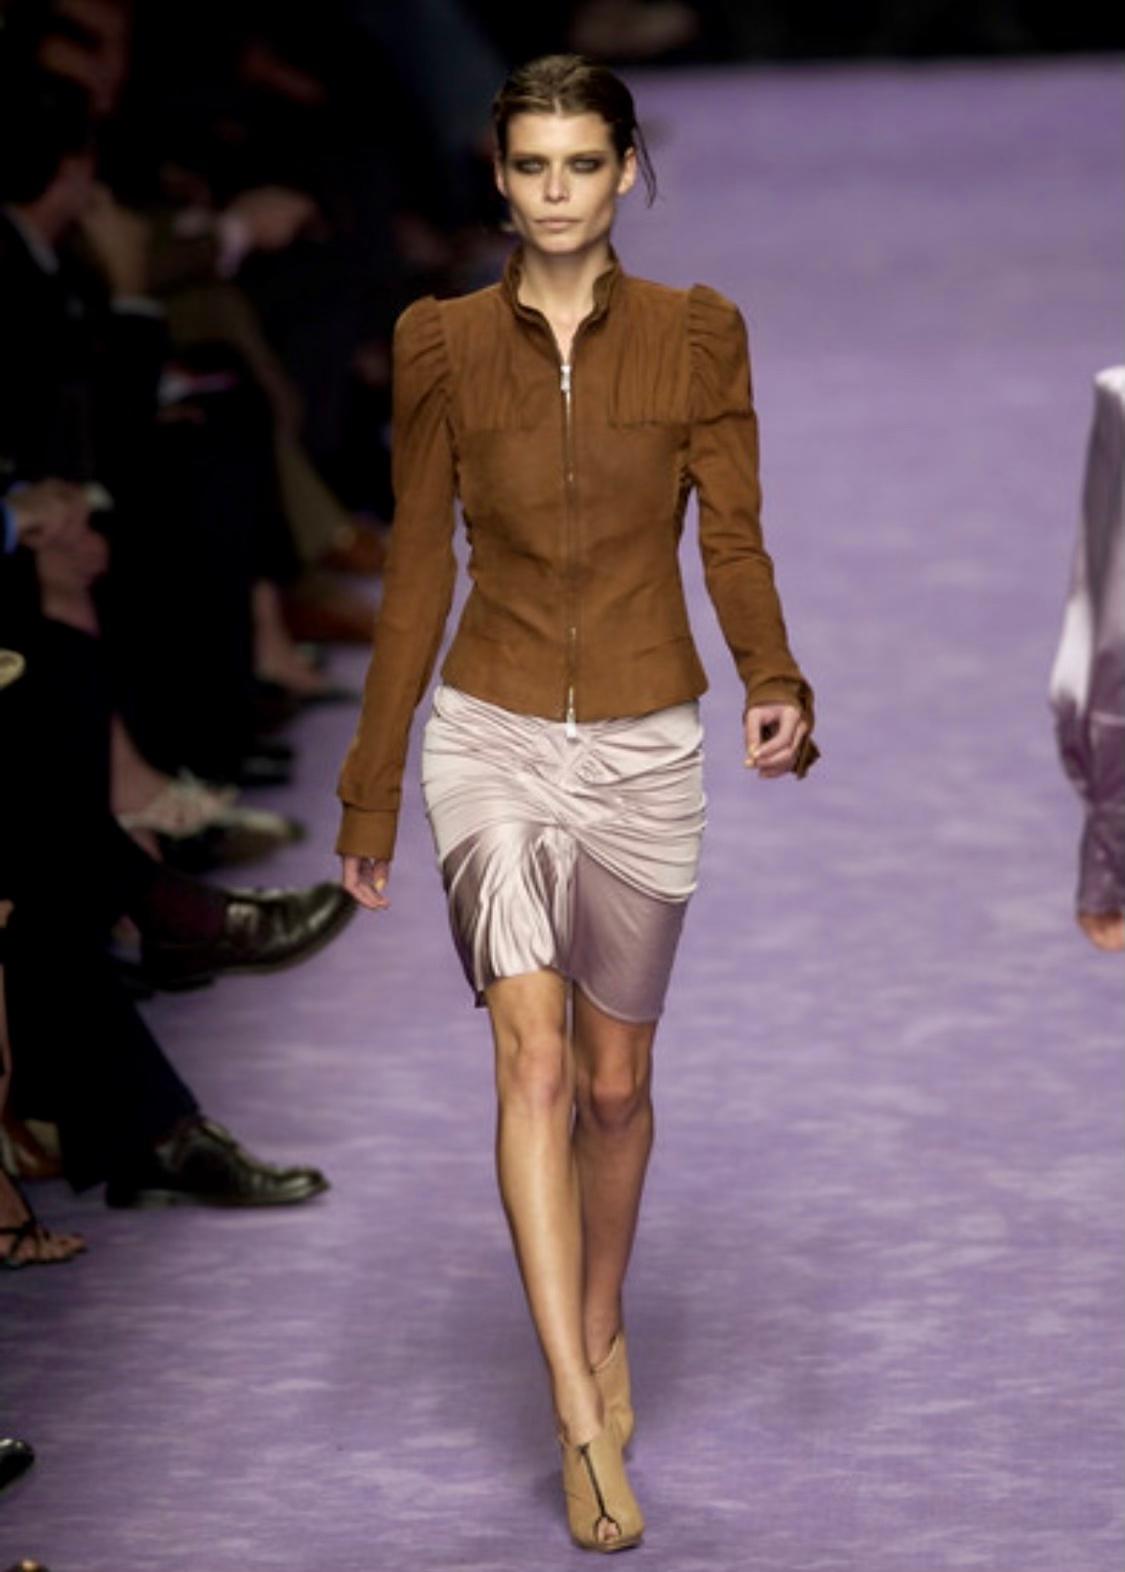 Brown S/S 2003 Yves Saint Laurent by Tom Ford Runway Dusty Lavender Ruched Skirt For Sale